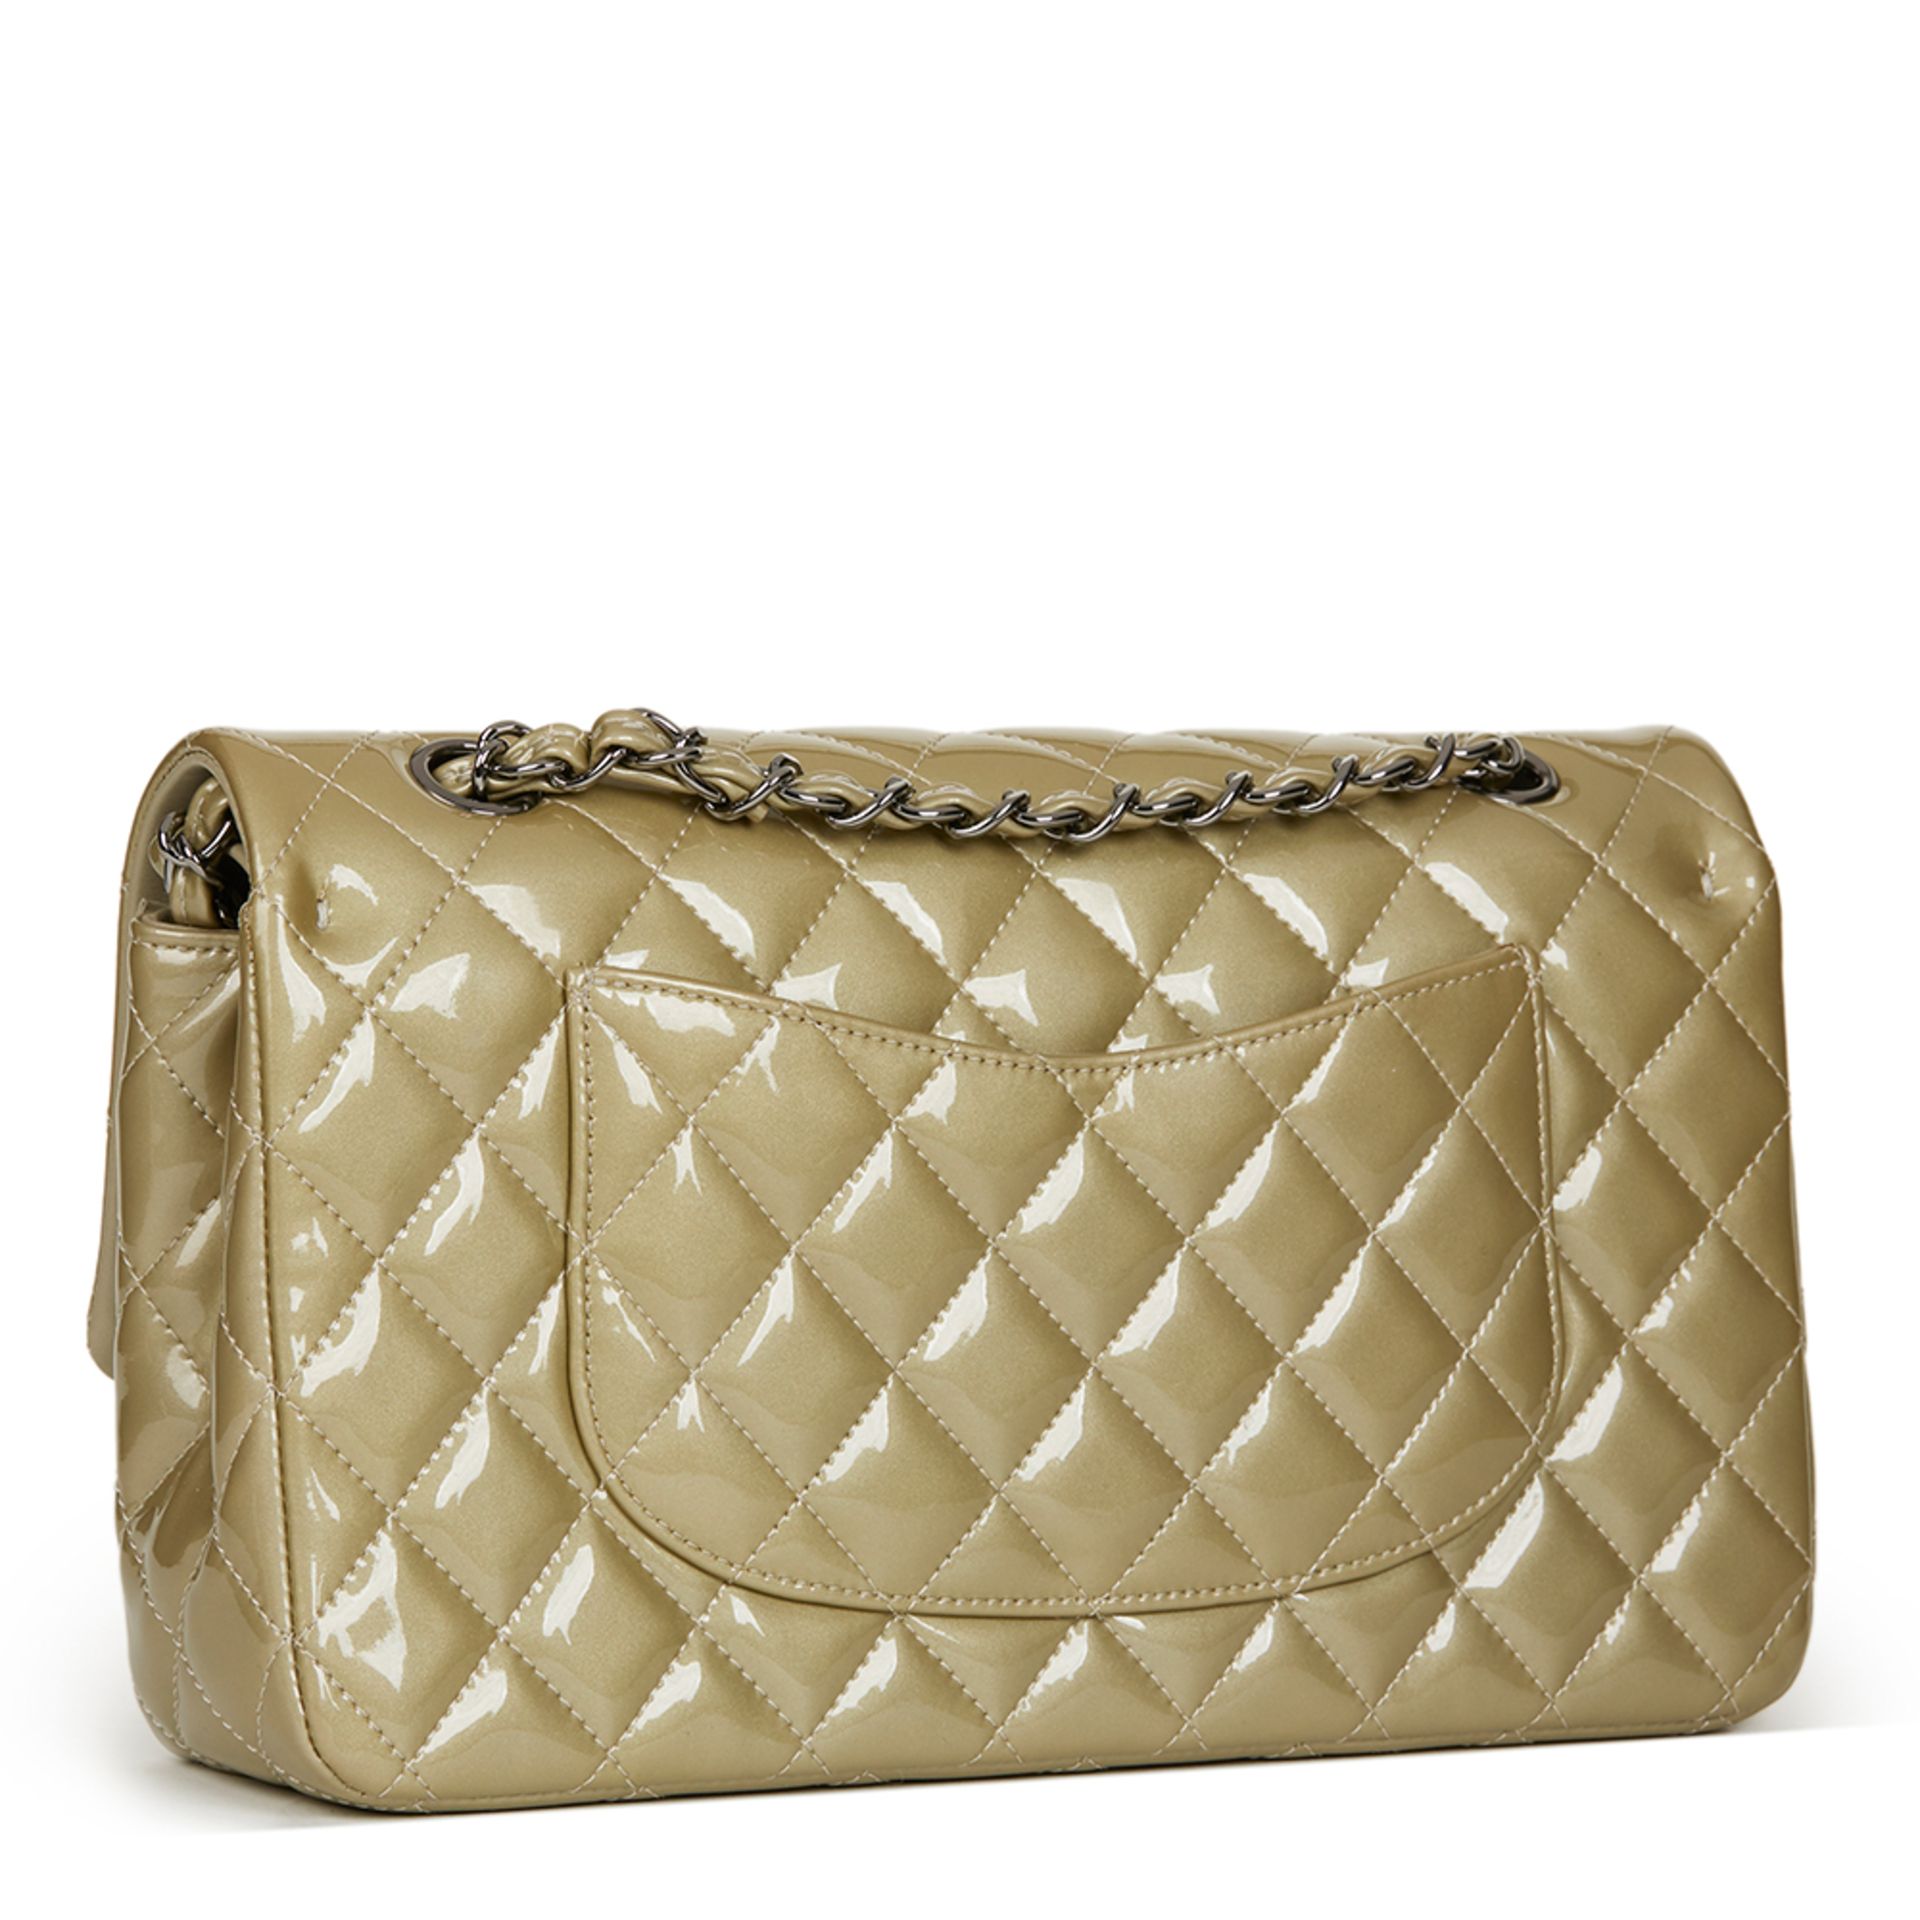 Pale Olive Quilted Iridescent Patent Leather Medium Classic Double Flap Bag - Image 5 of 10